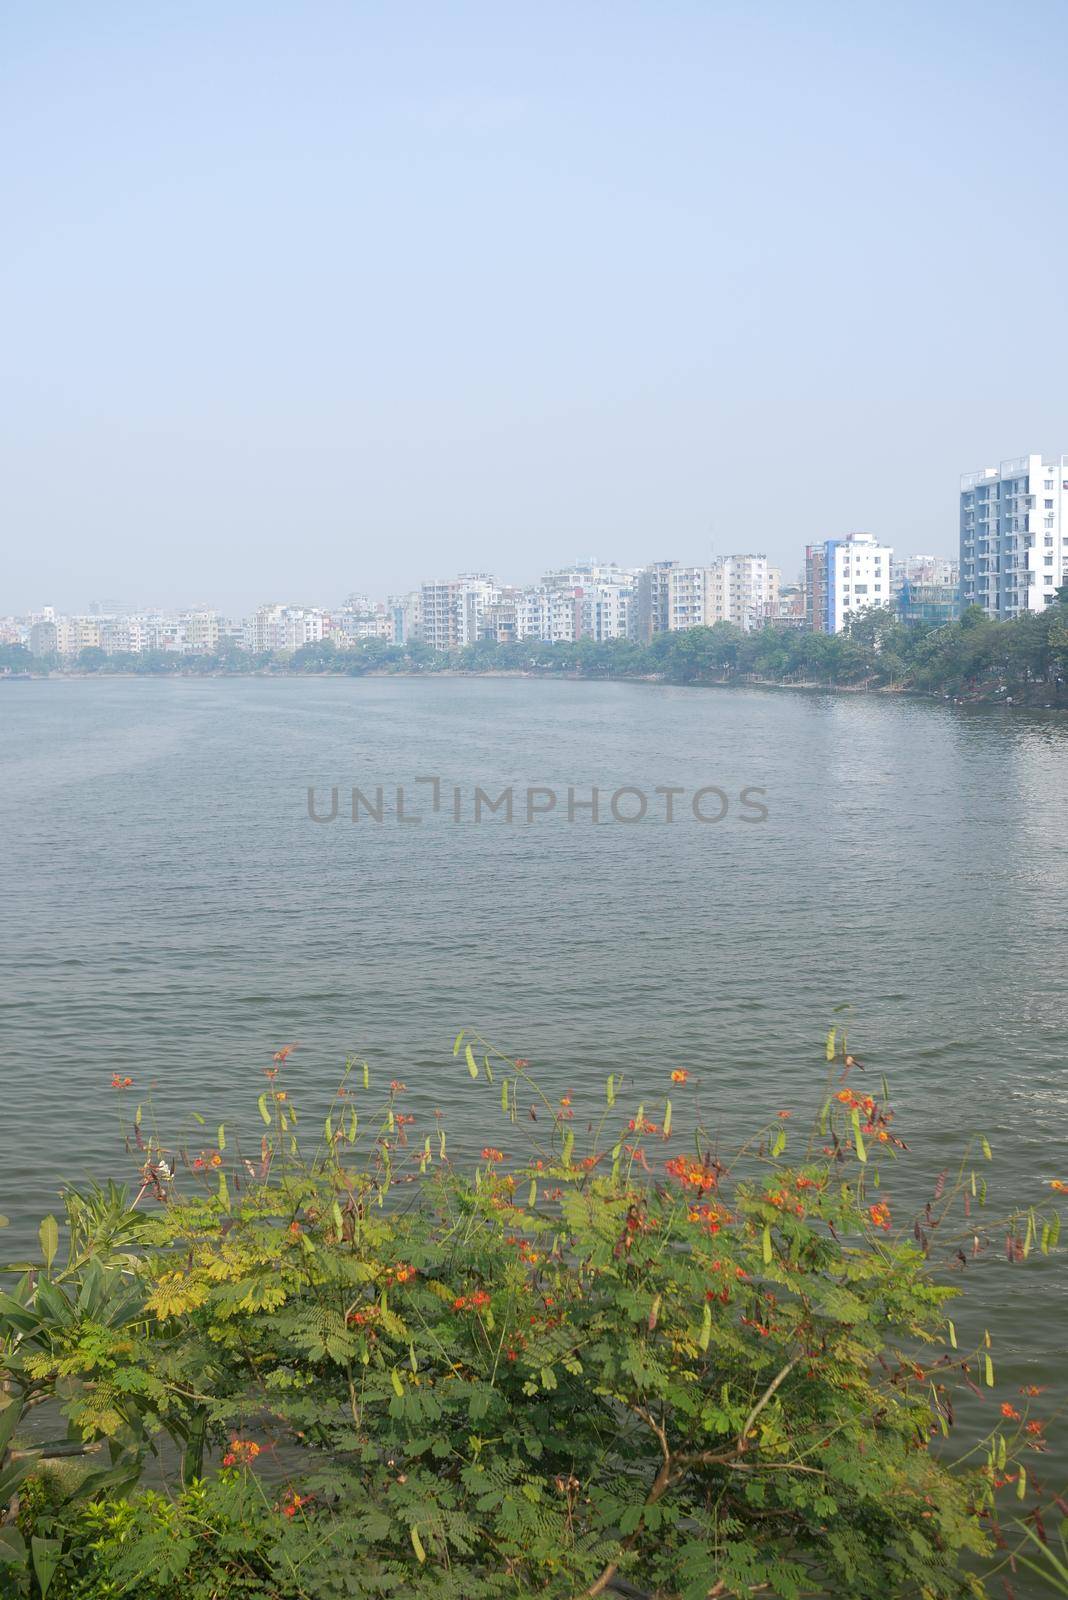 financial and residential buildings in dhaka city in bangladesh, by towfiq007